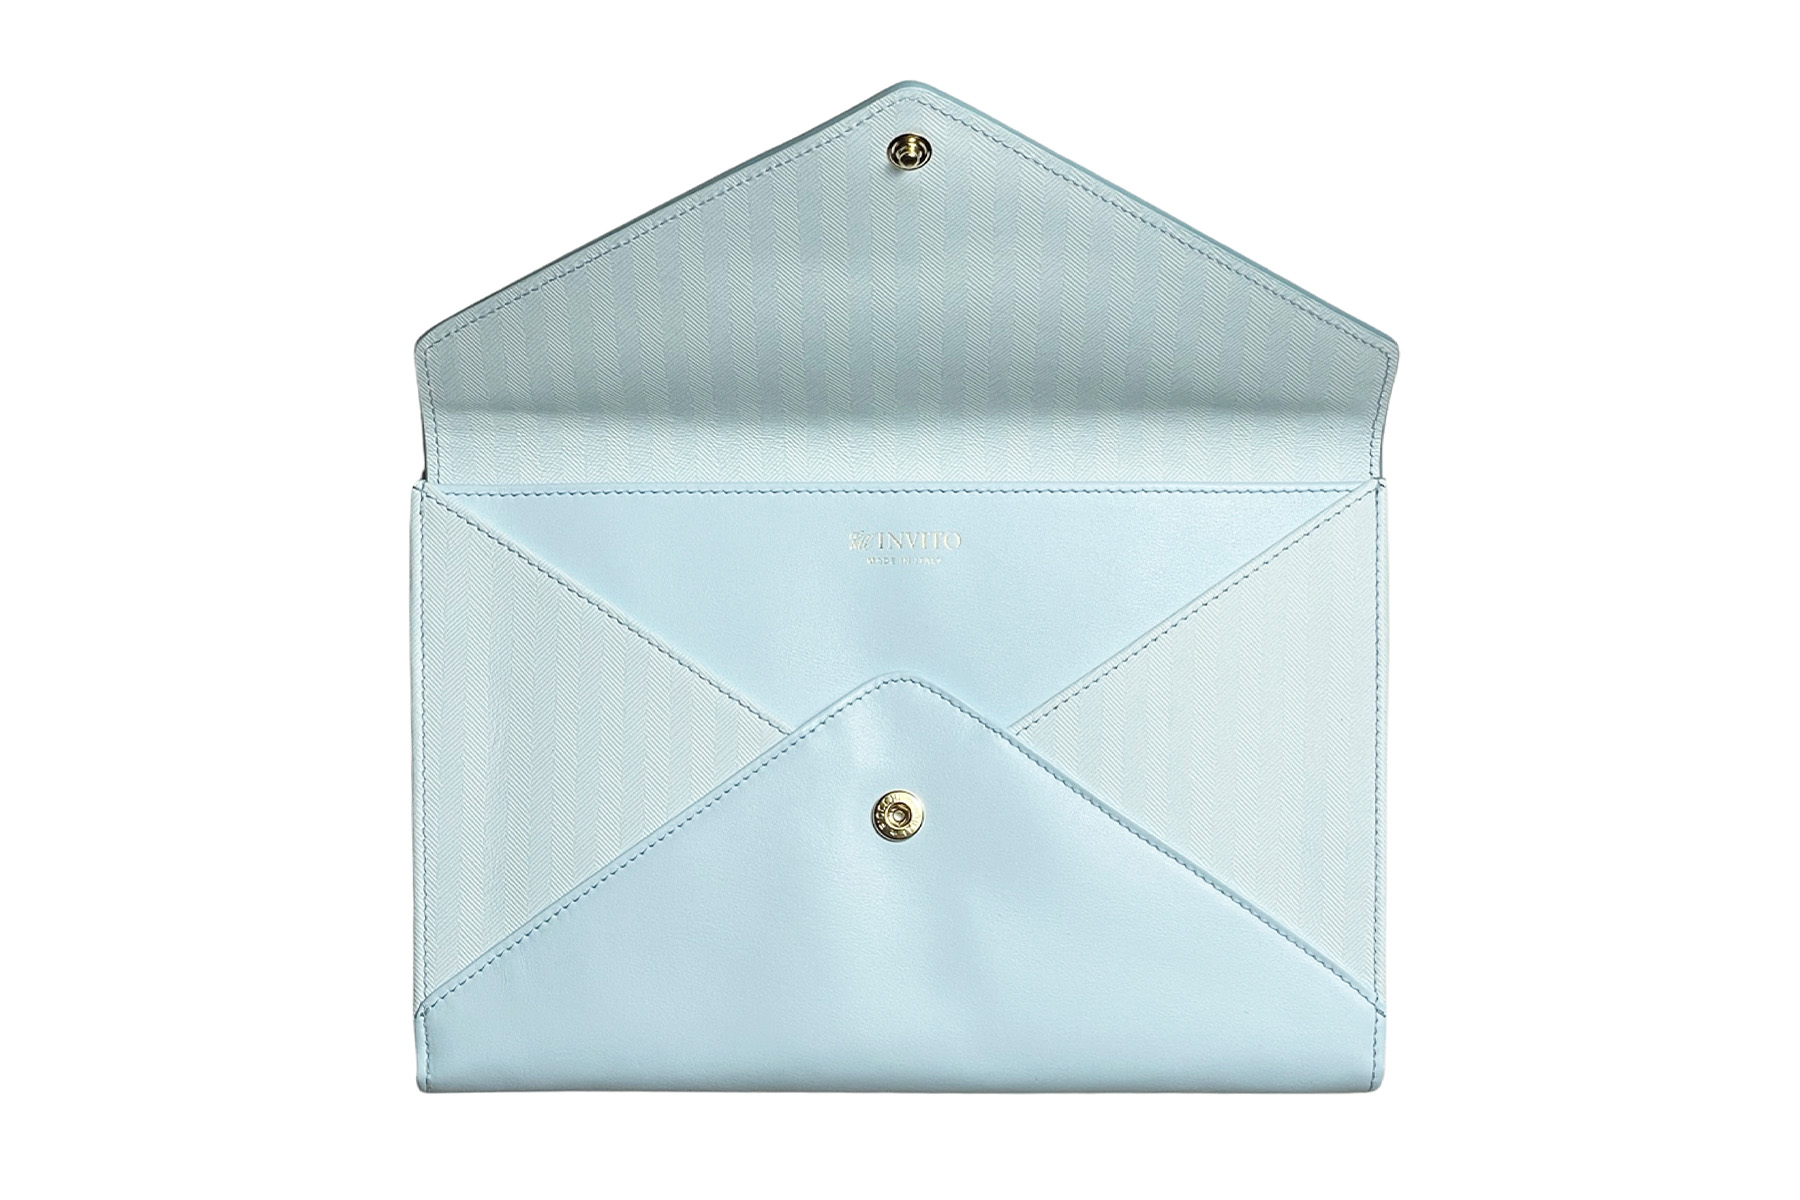 Cielo Envelope Clutch from Bell Invito